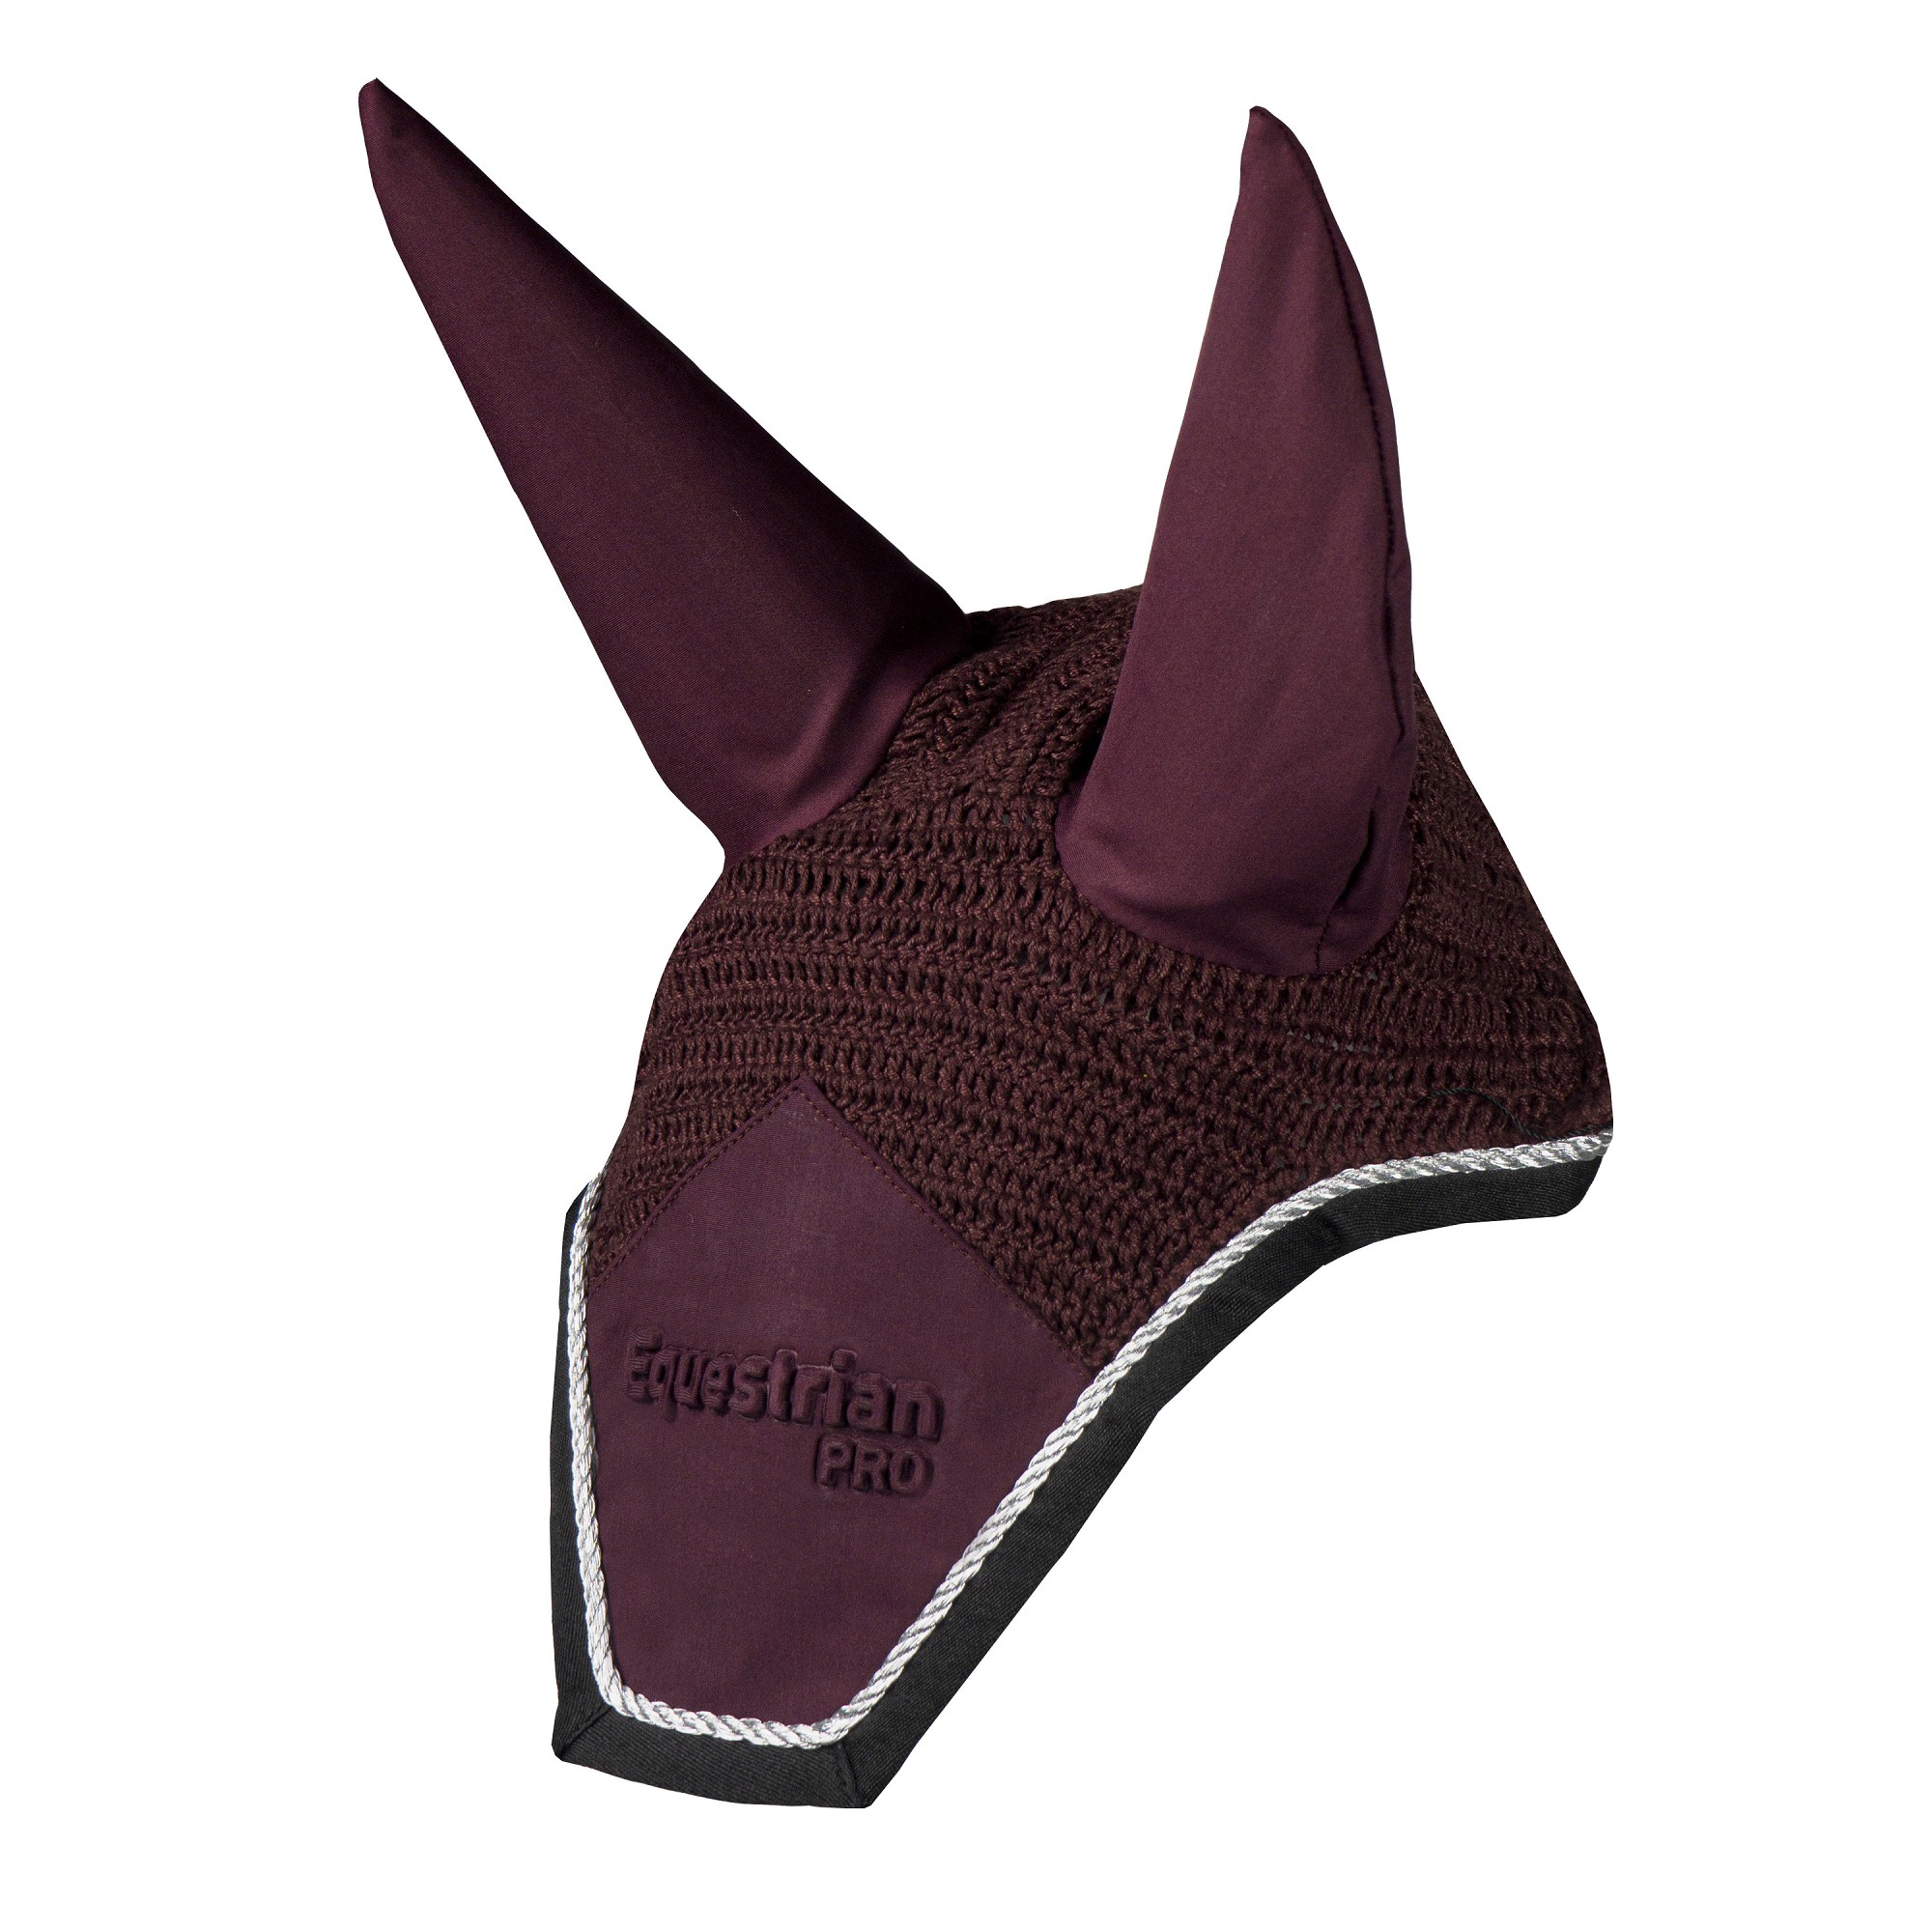 Bonnet chasse-mouches Equestrian pro Embossed4